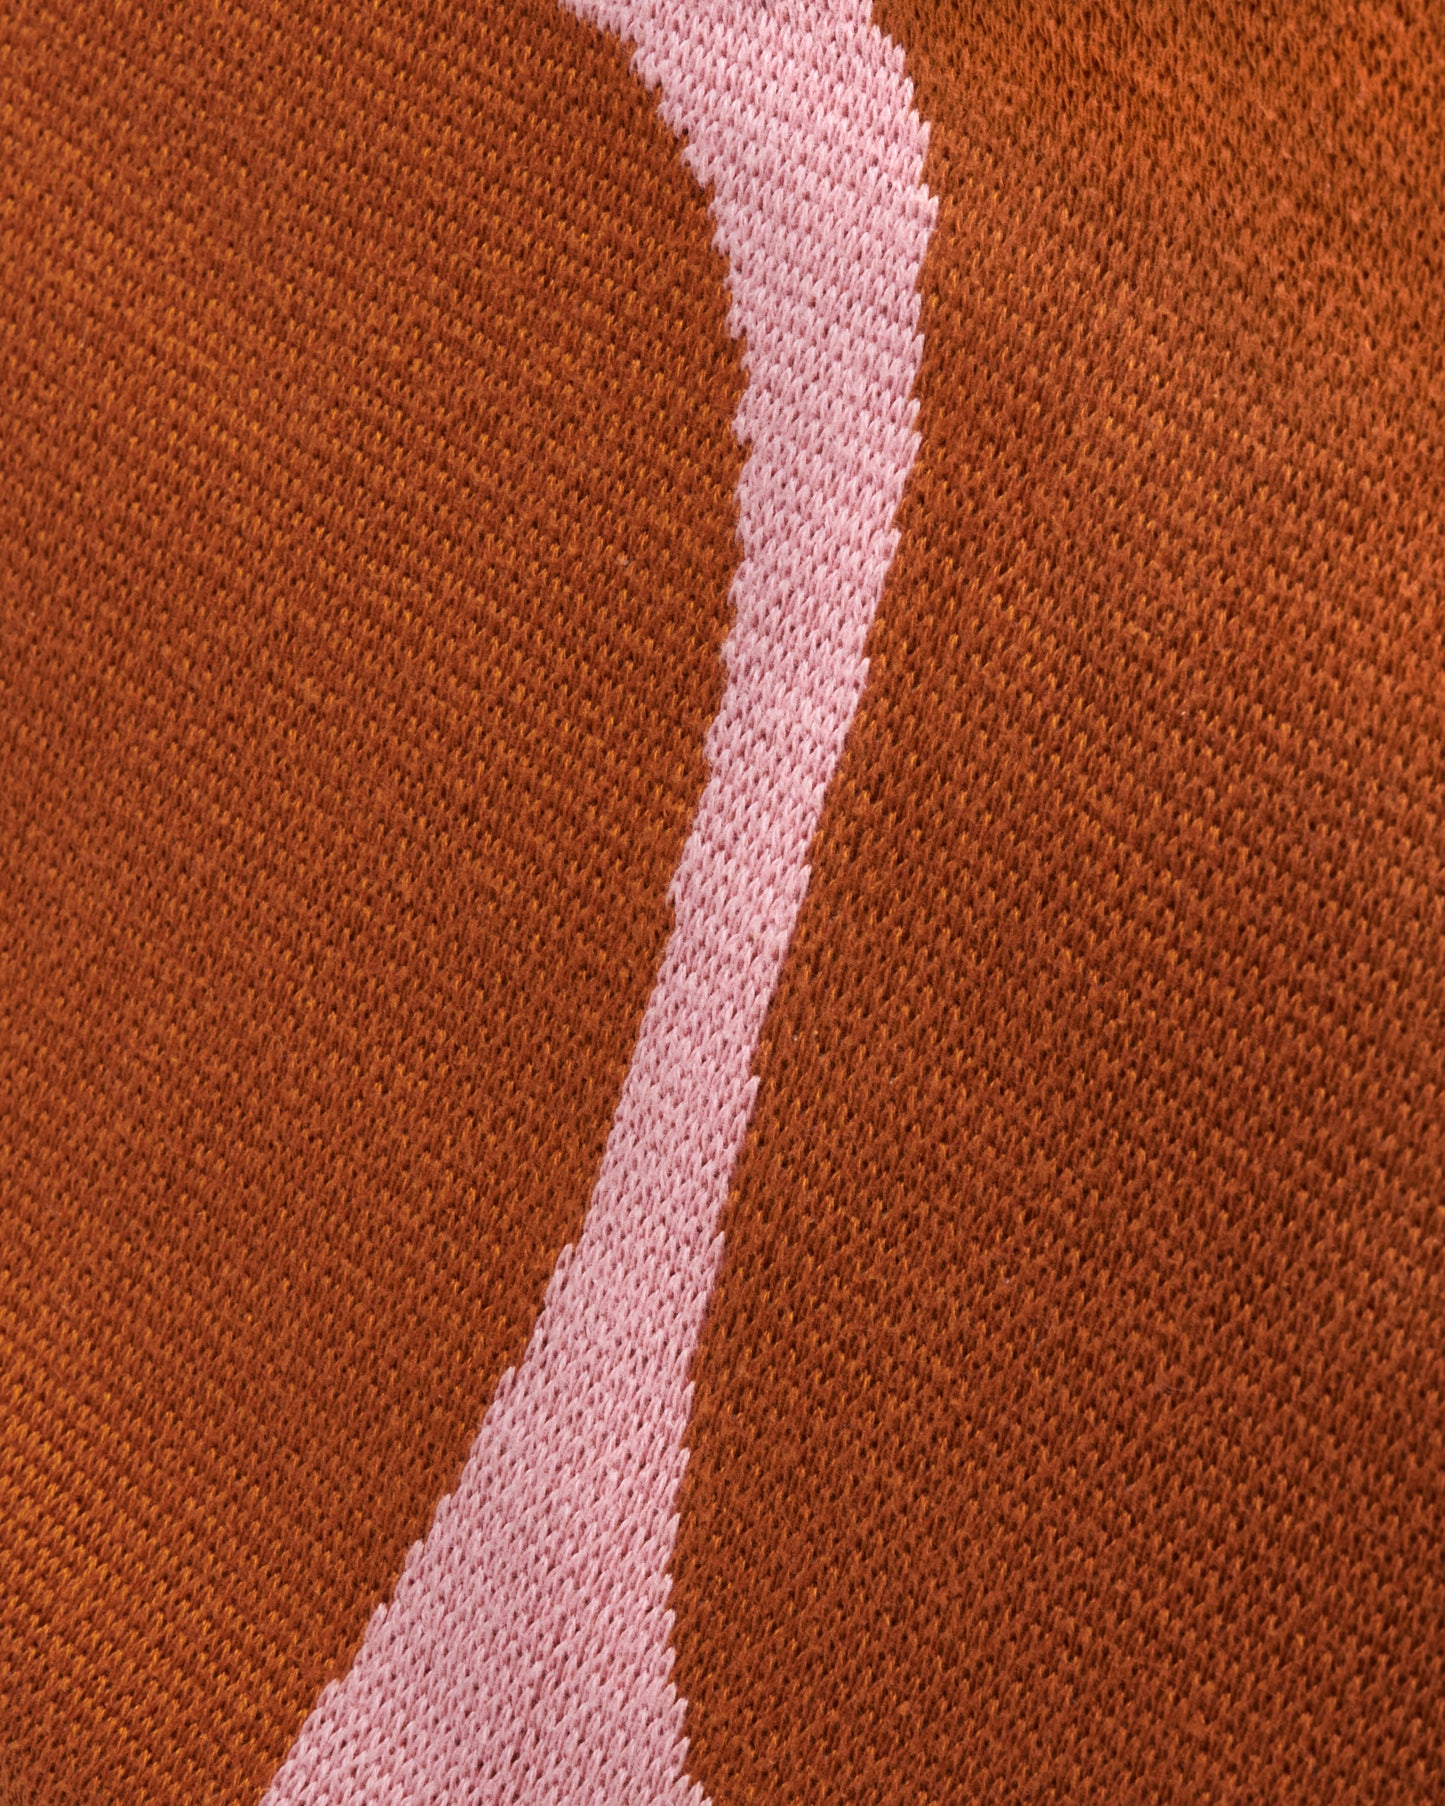 A long knit jacquard throw blanket featuring a minimalist design inspired by the Mojave desert, shown close up.